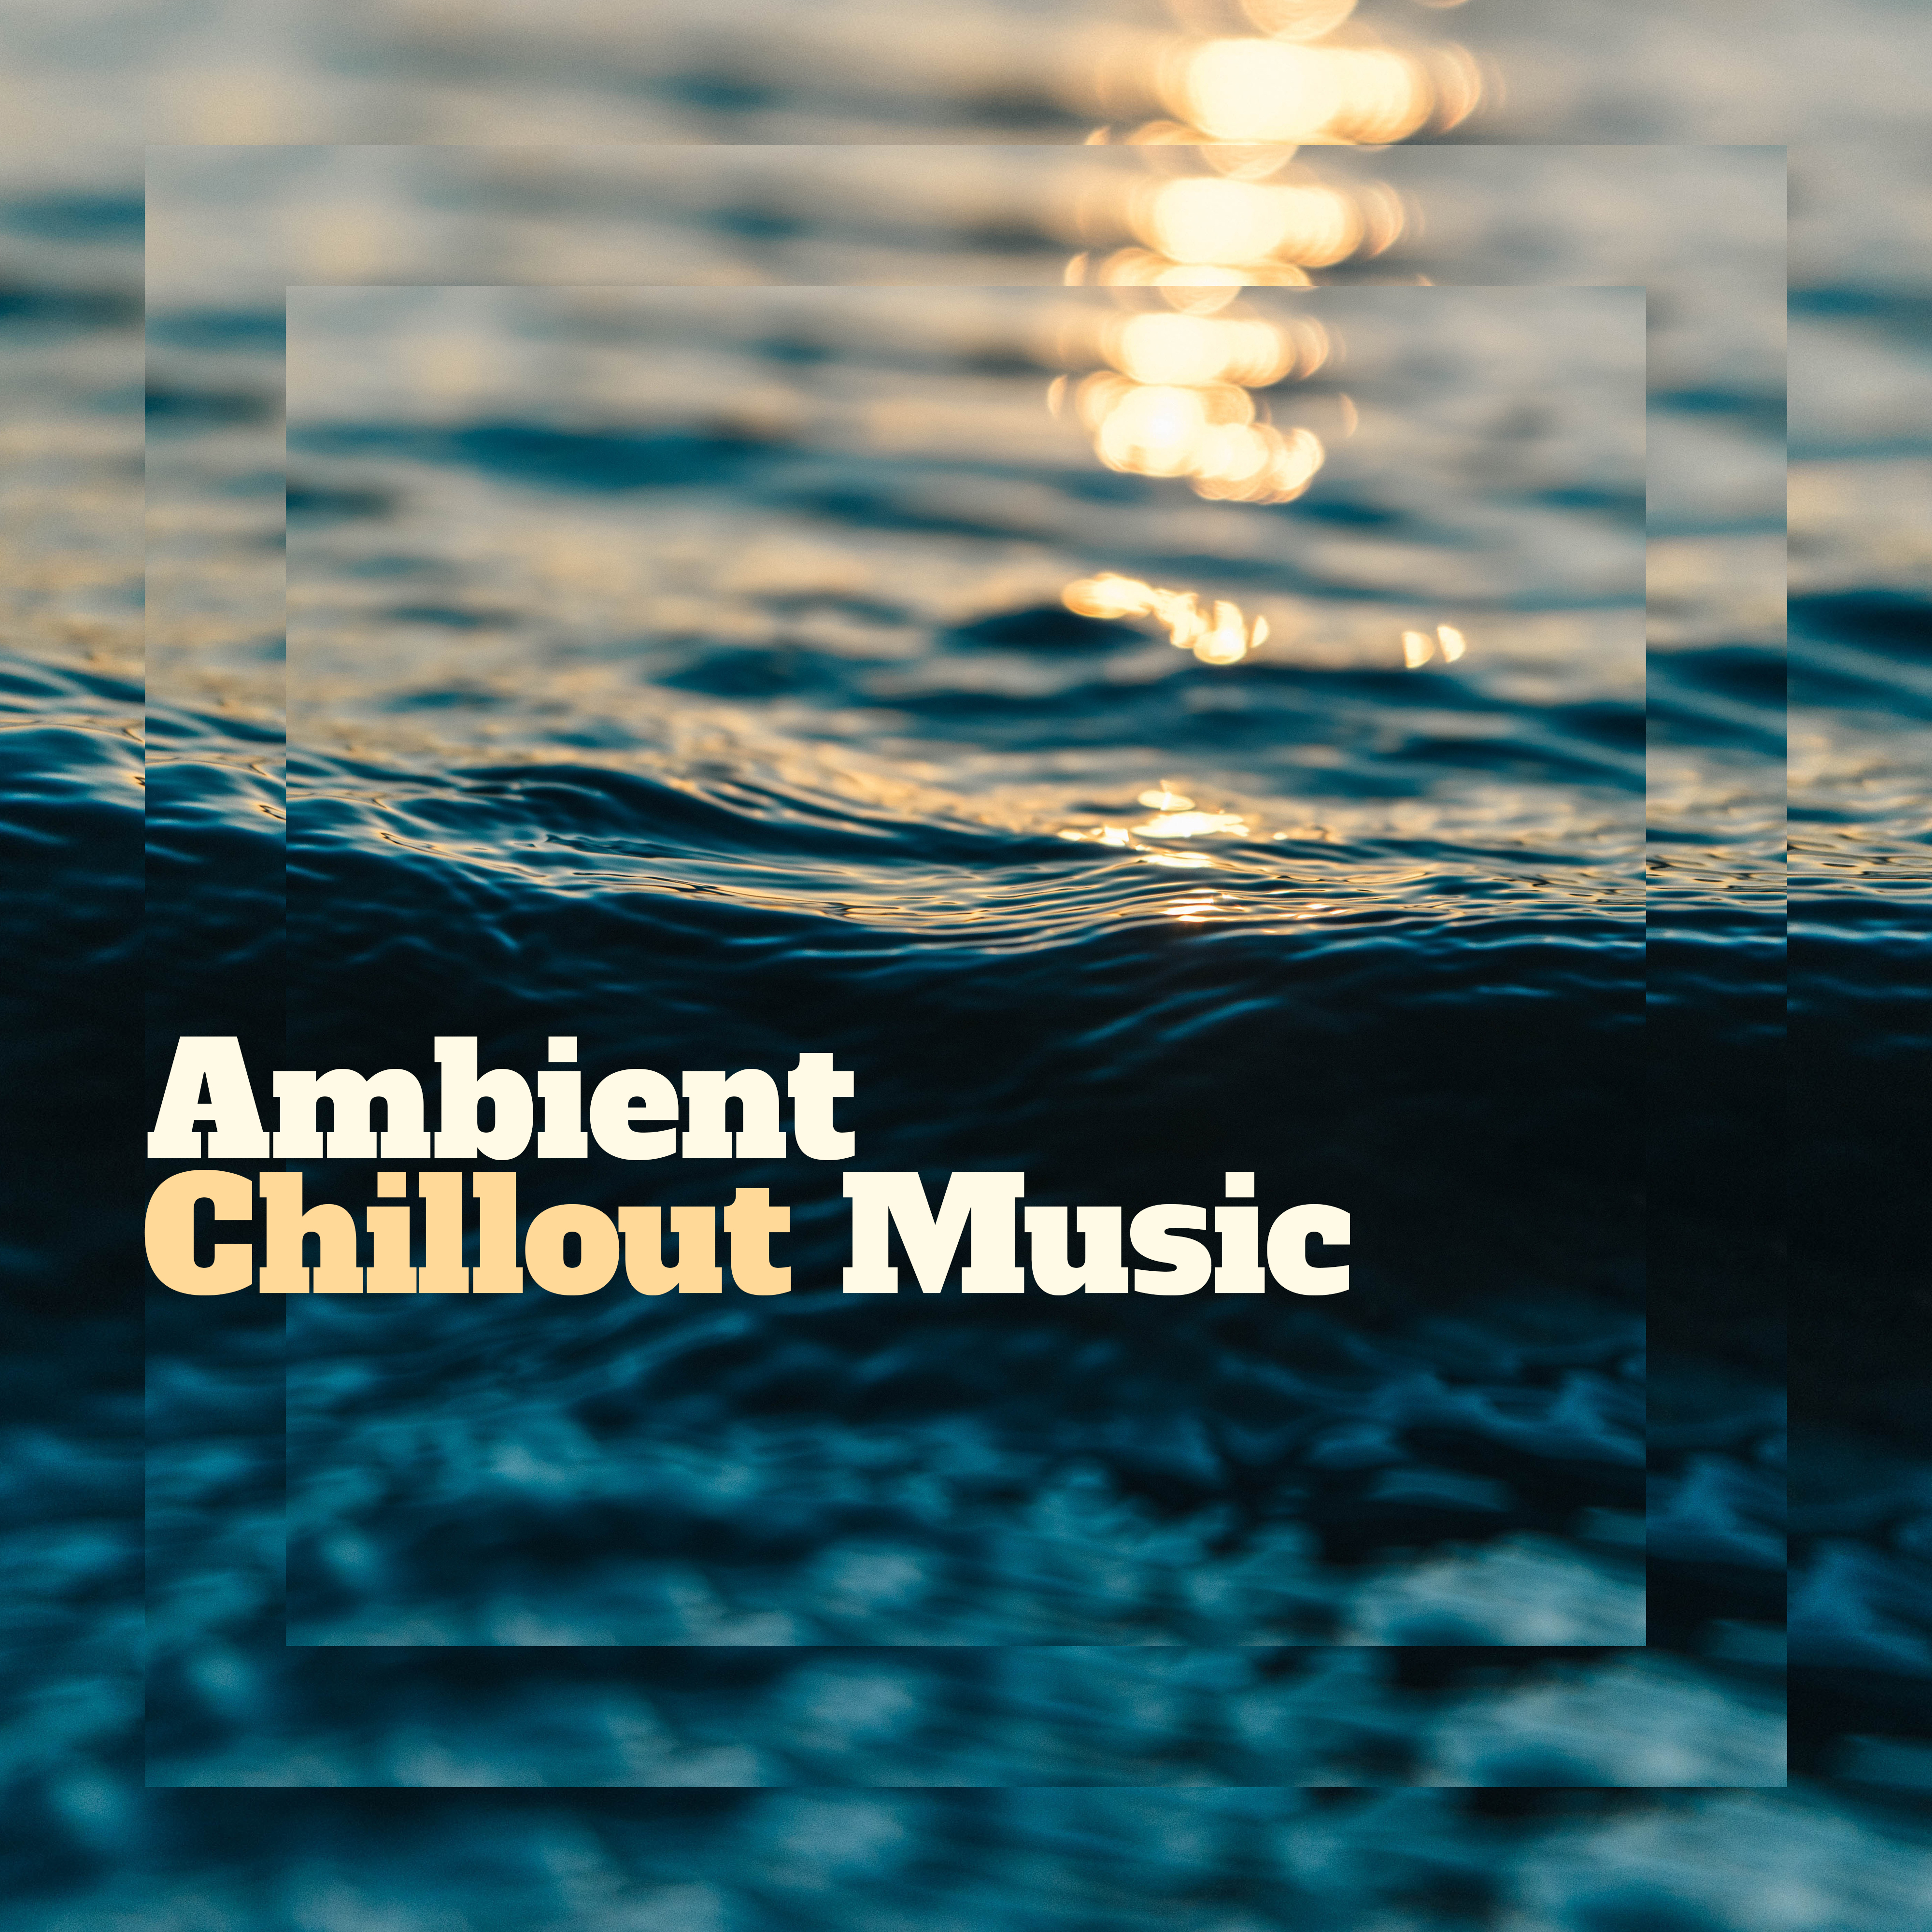 Ambient Chillout Music – Chillout Downbeats Lounge, Summer Hits 2017, Chill Out Music